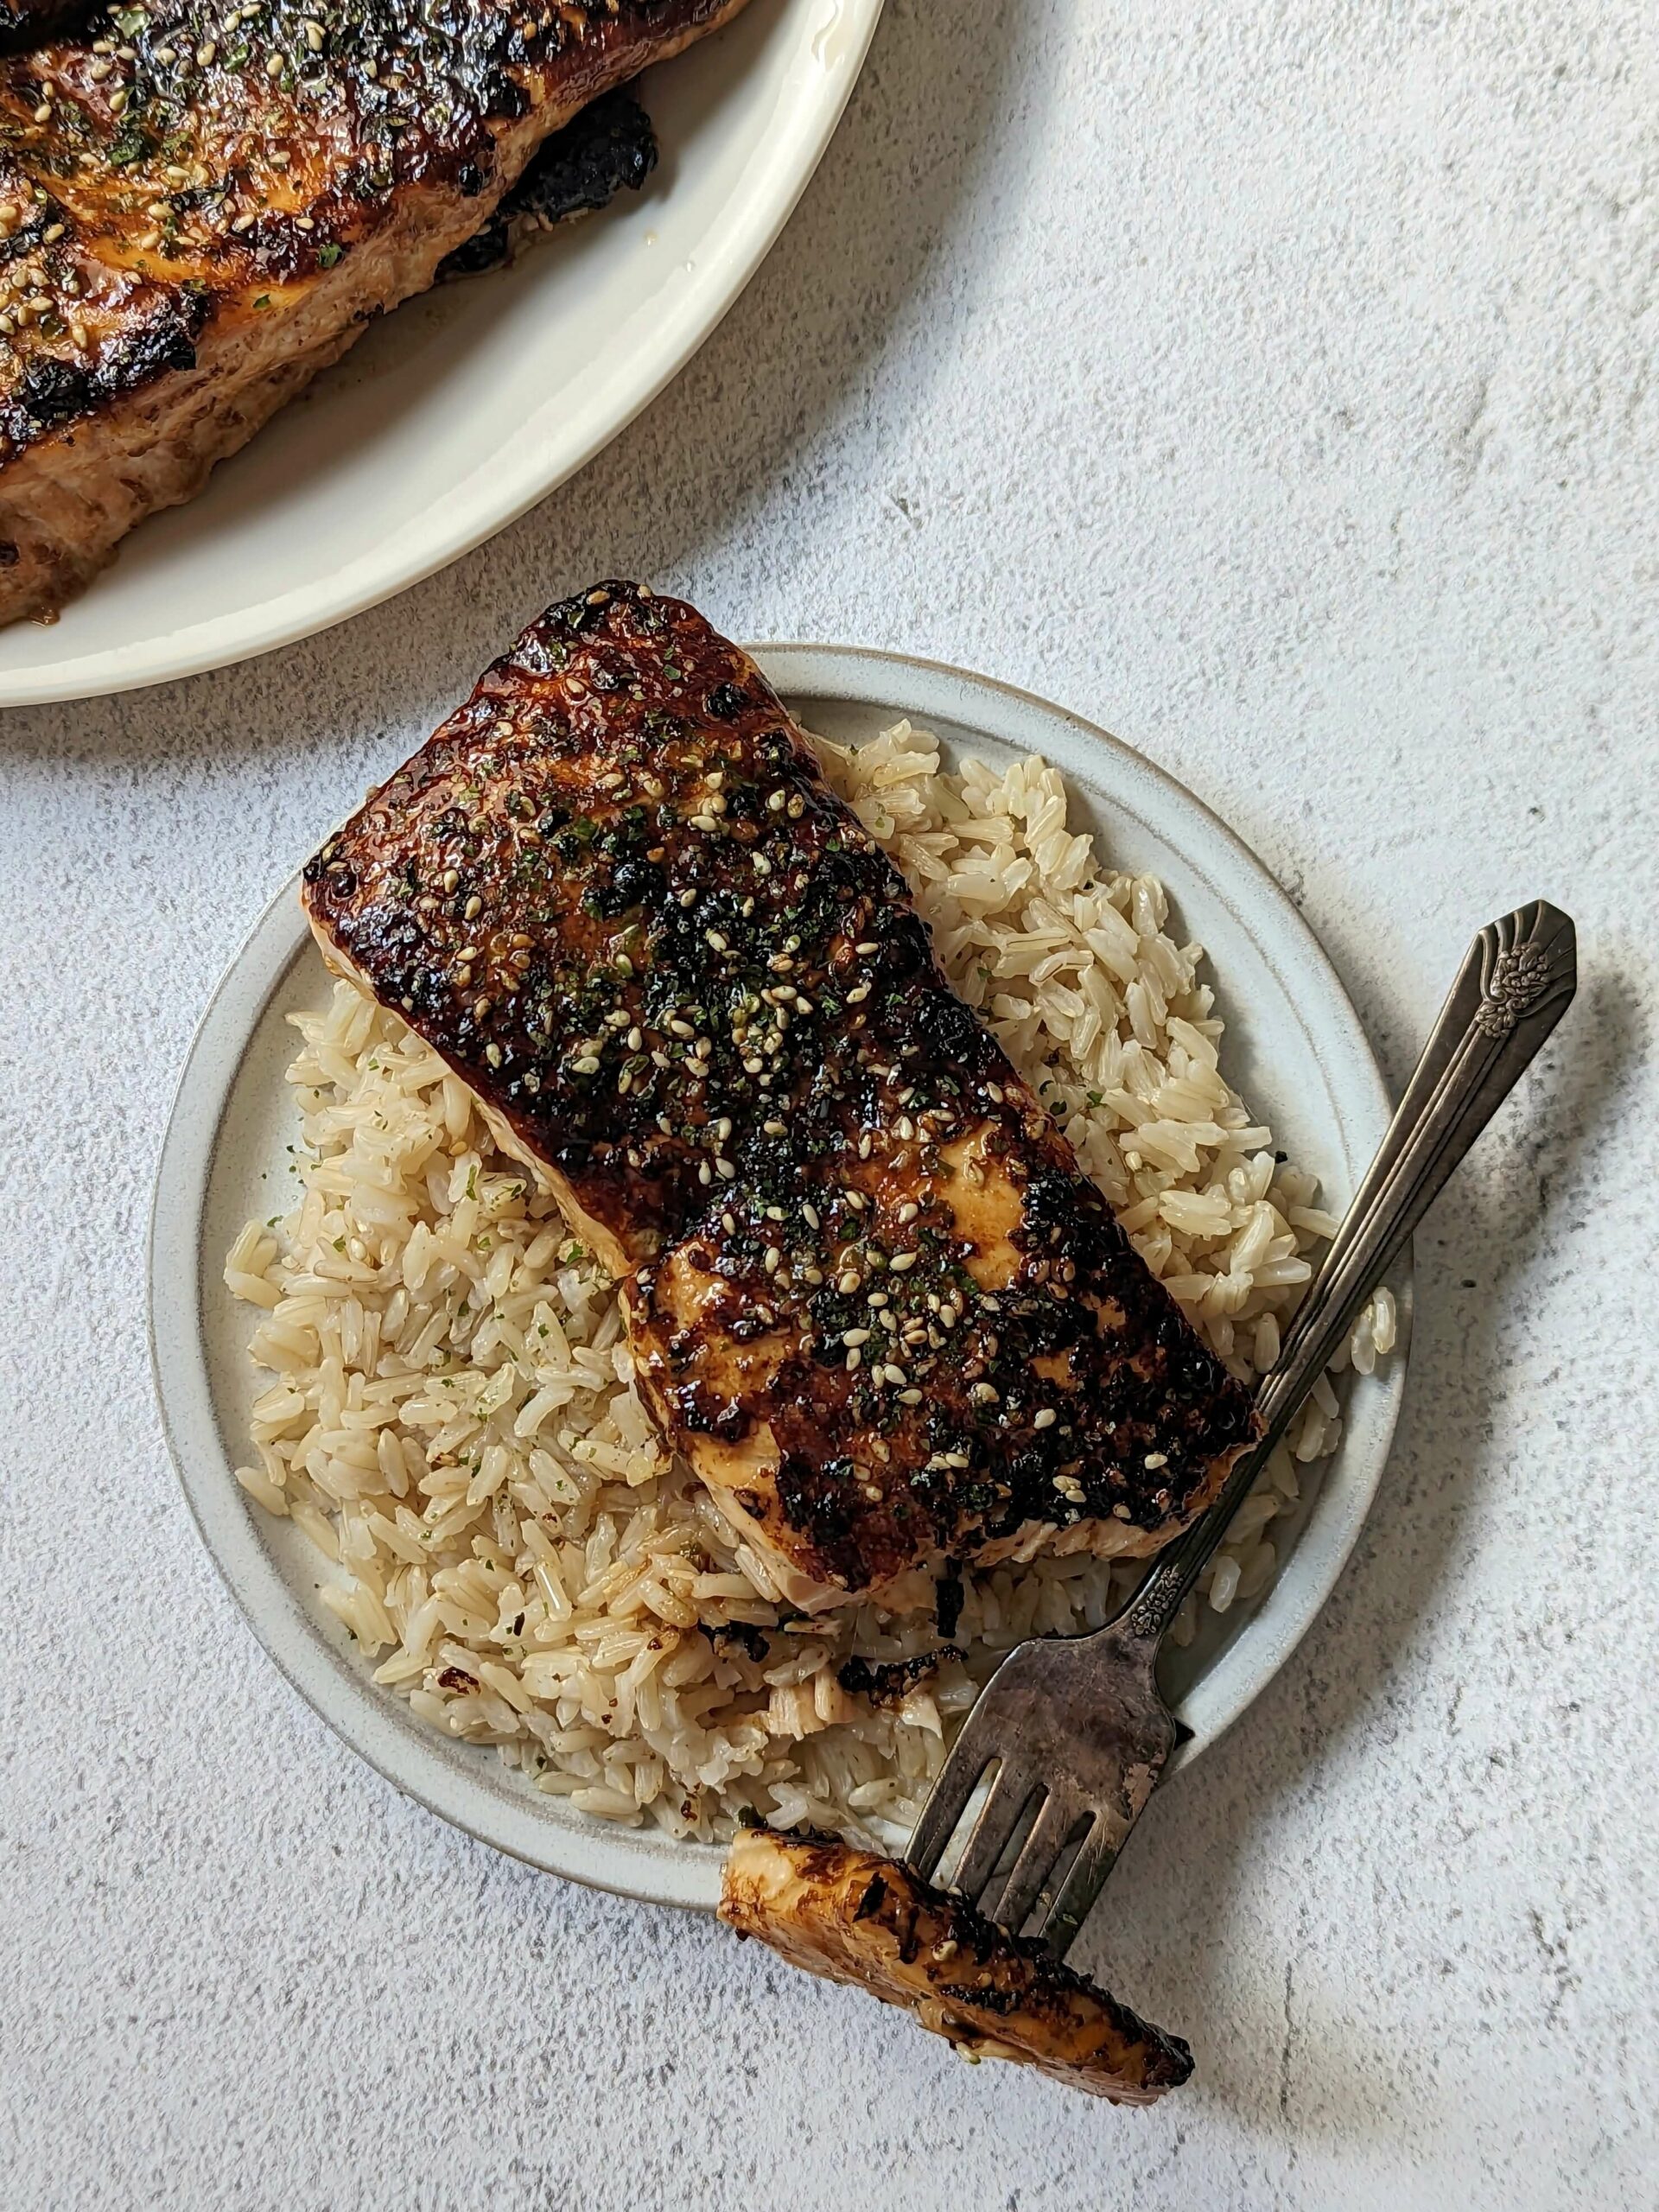 A fillet of furikake salmon cut open with a fork and served on a bed of rice.